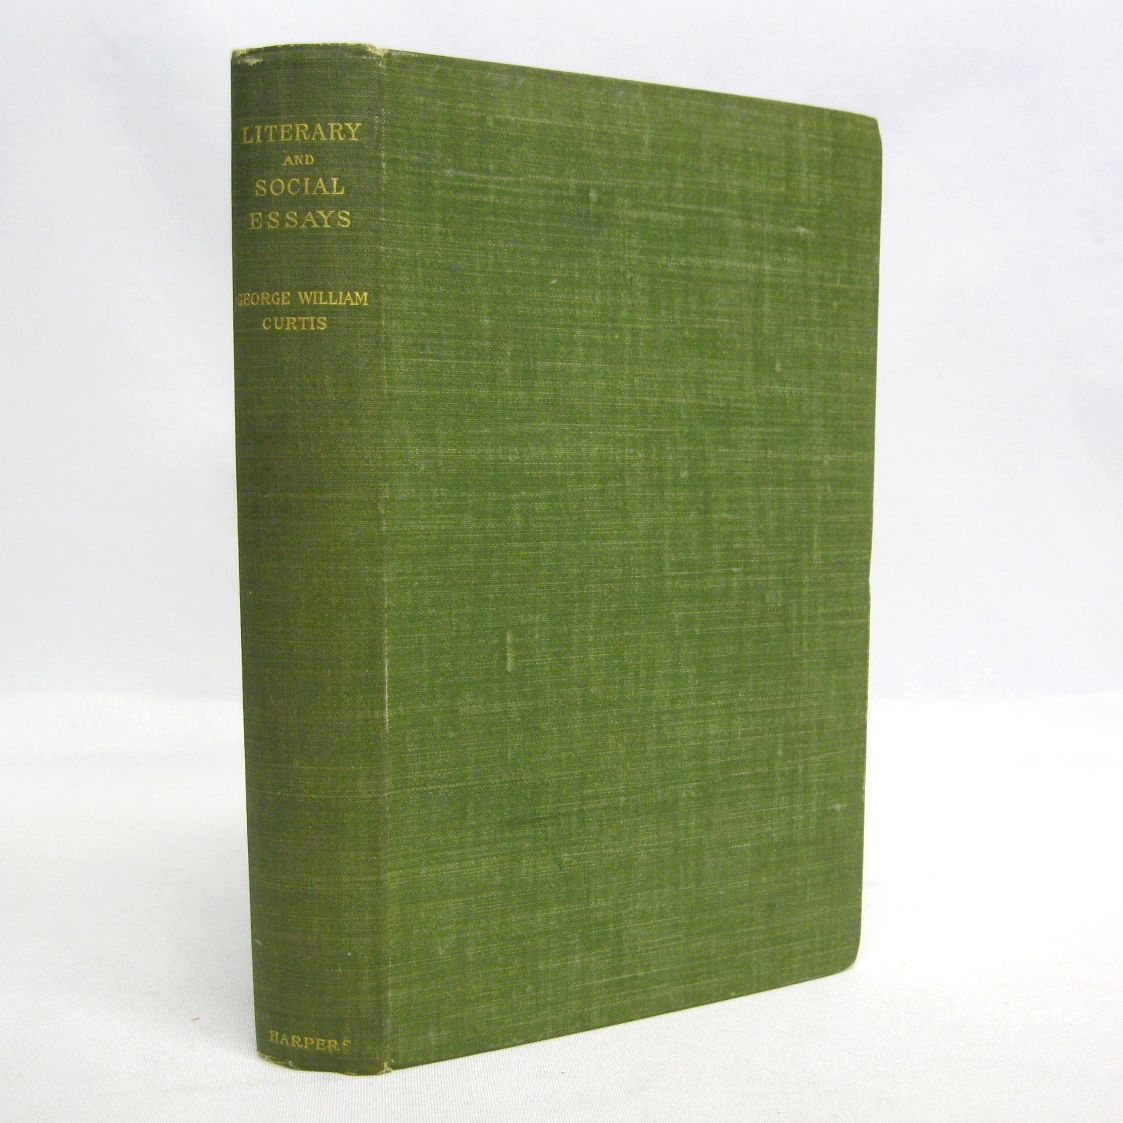 Literary & Social Essays by George William Curtis